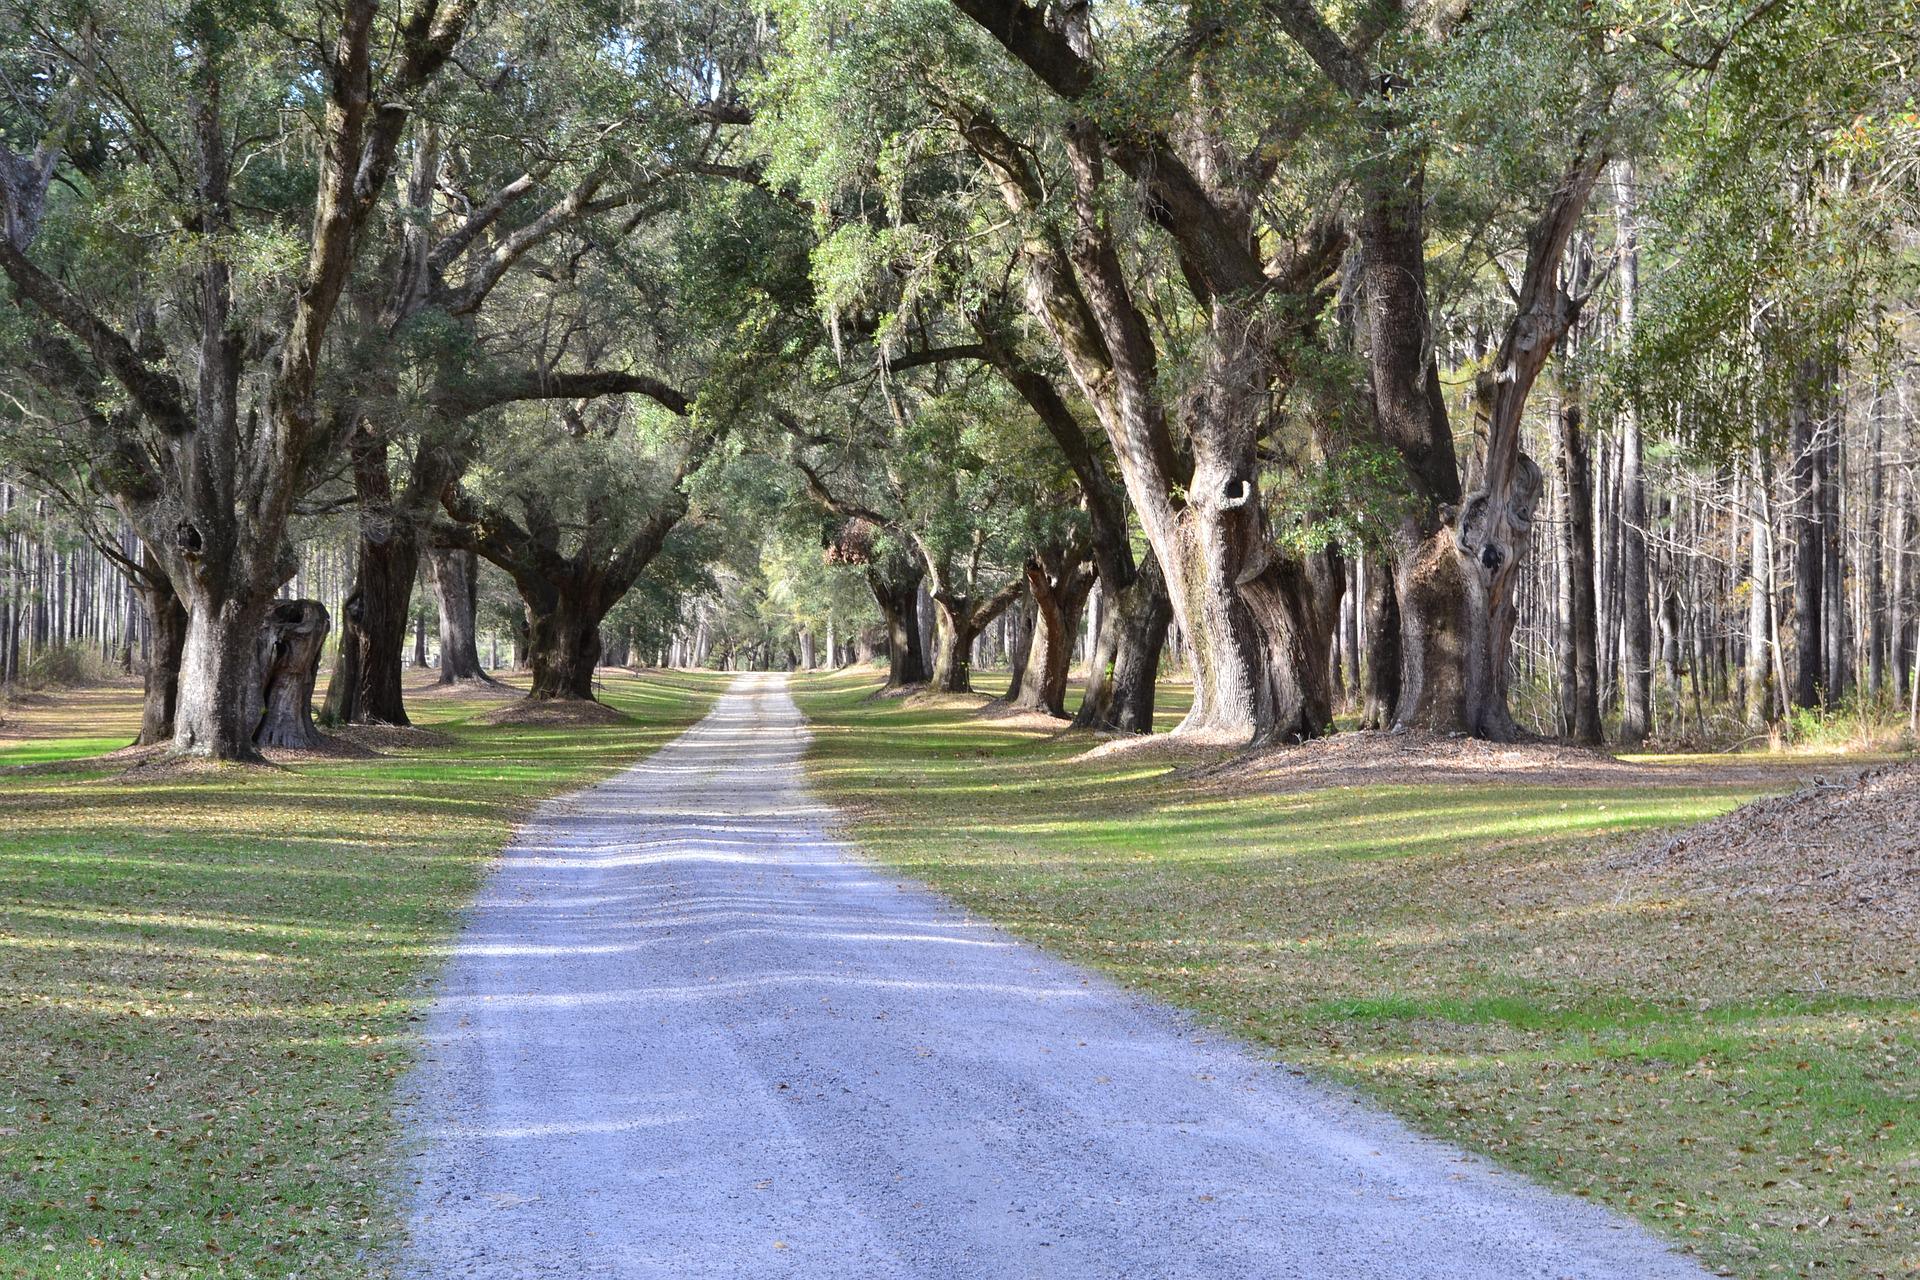 Take the Ford and Discover Nature: 3 State Parks Near Moncks Corner, SC